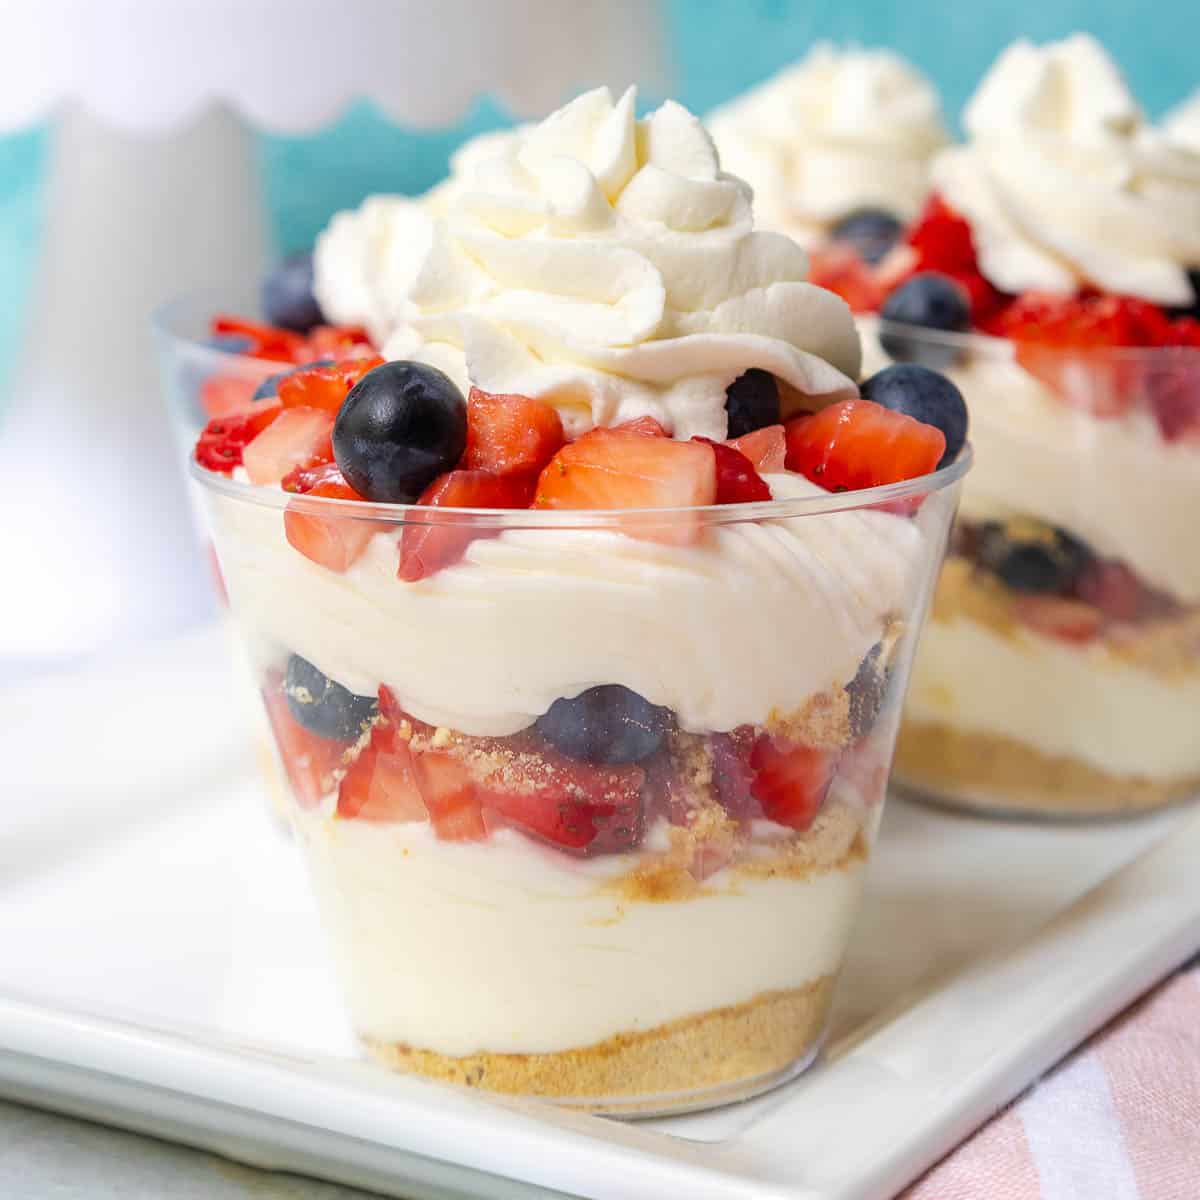 Layered no bake cheesecake cups with repeating layers of crust, cream cheese mixture, and berries.